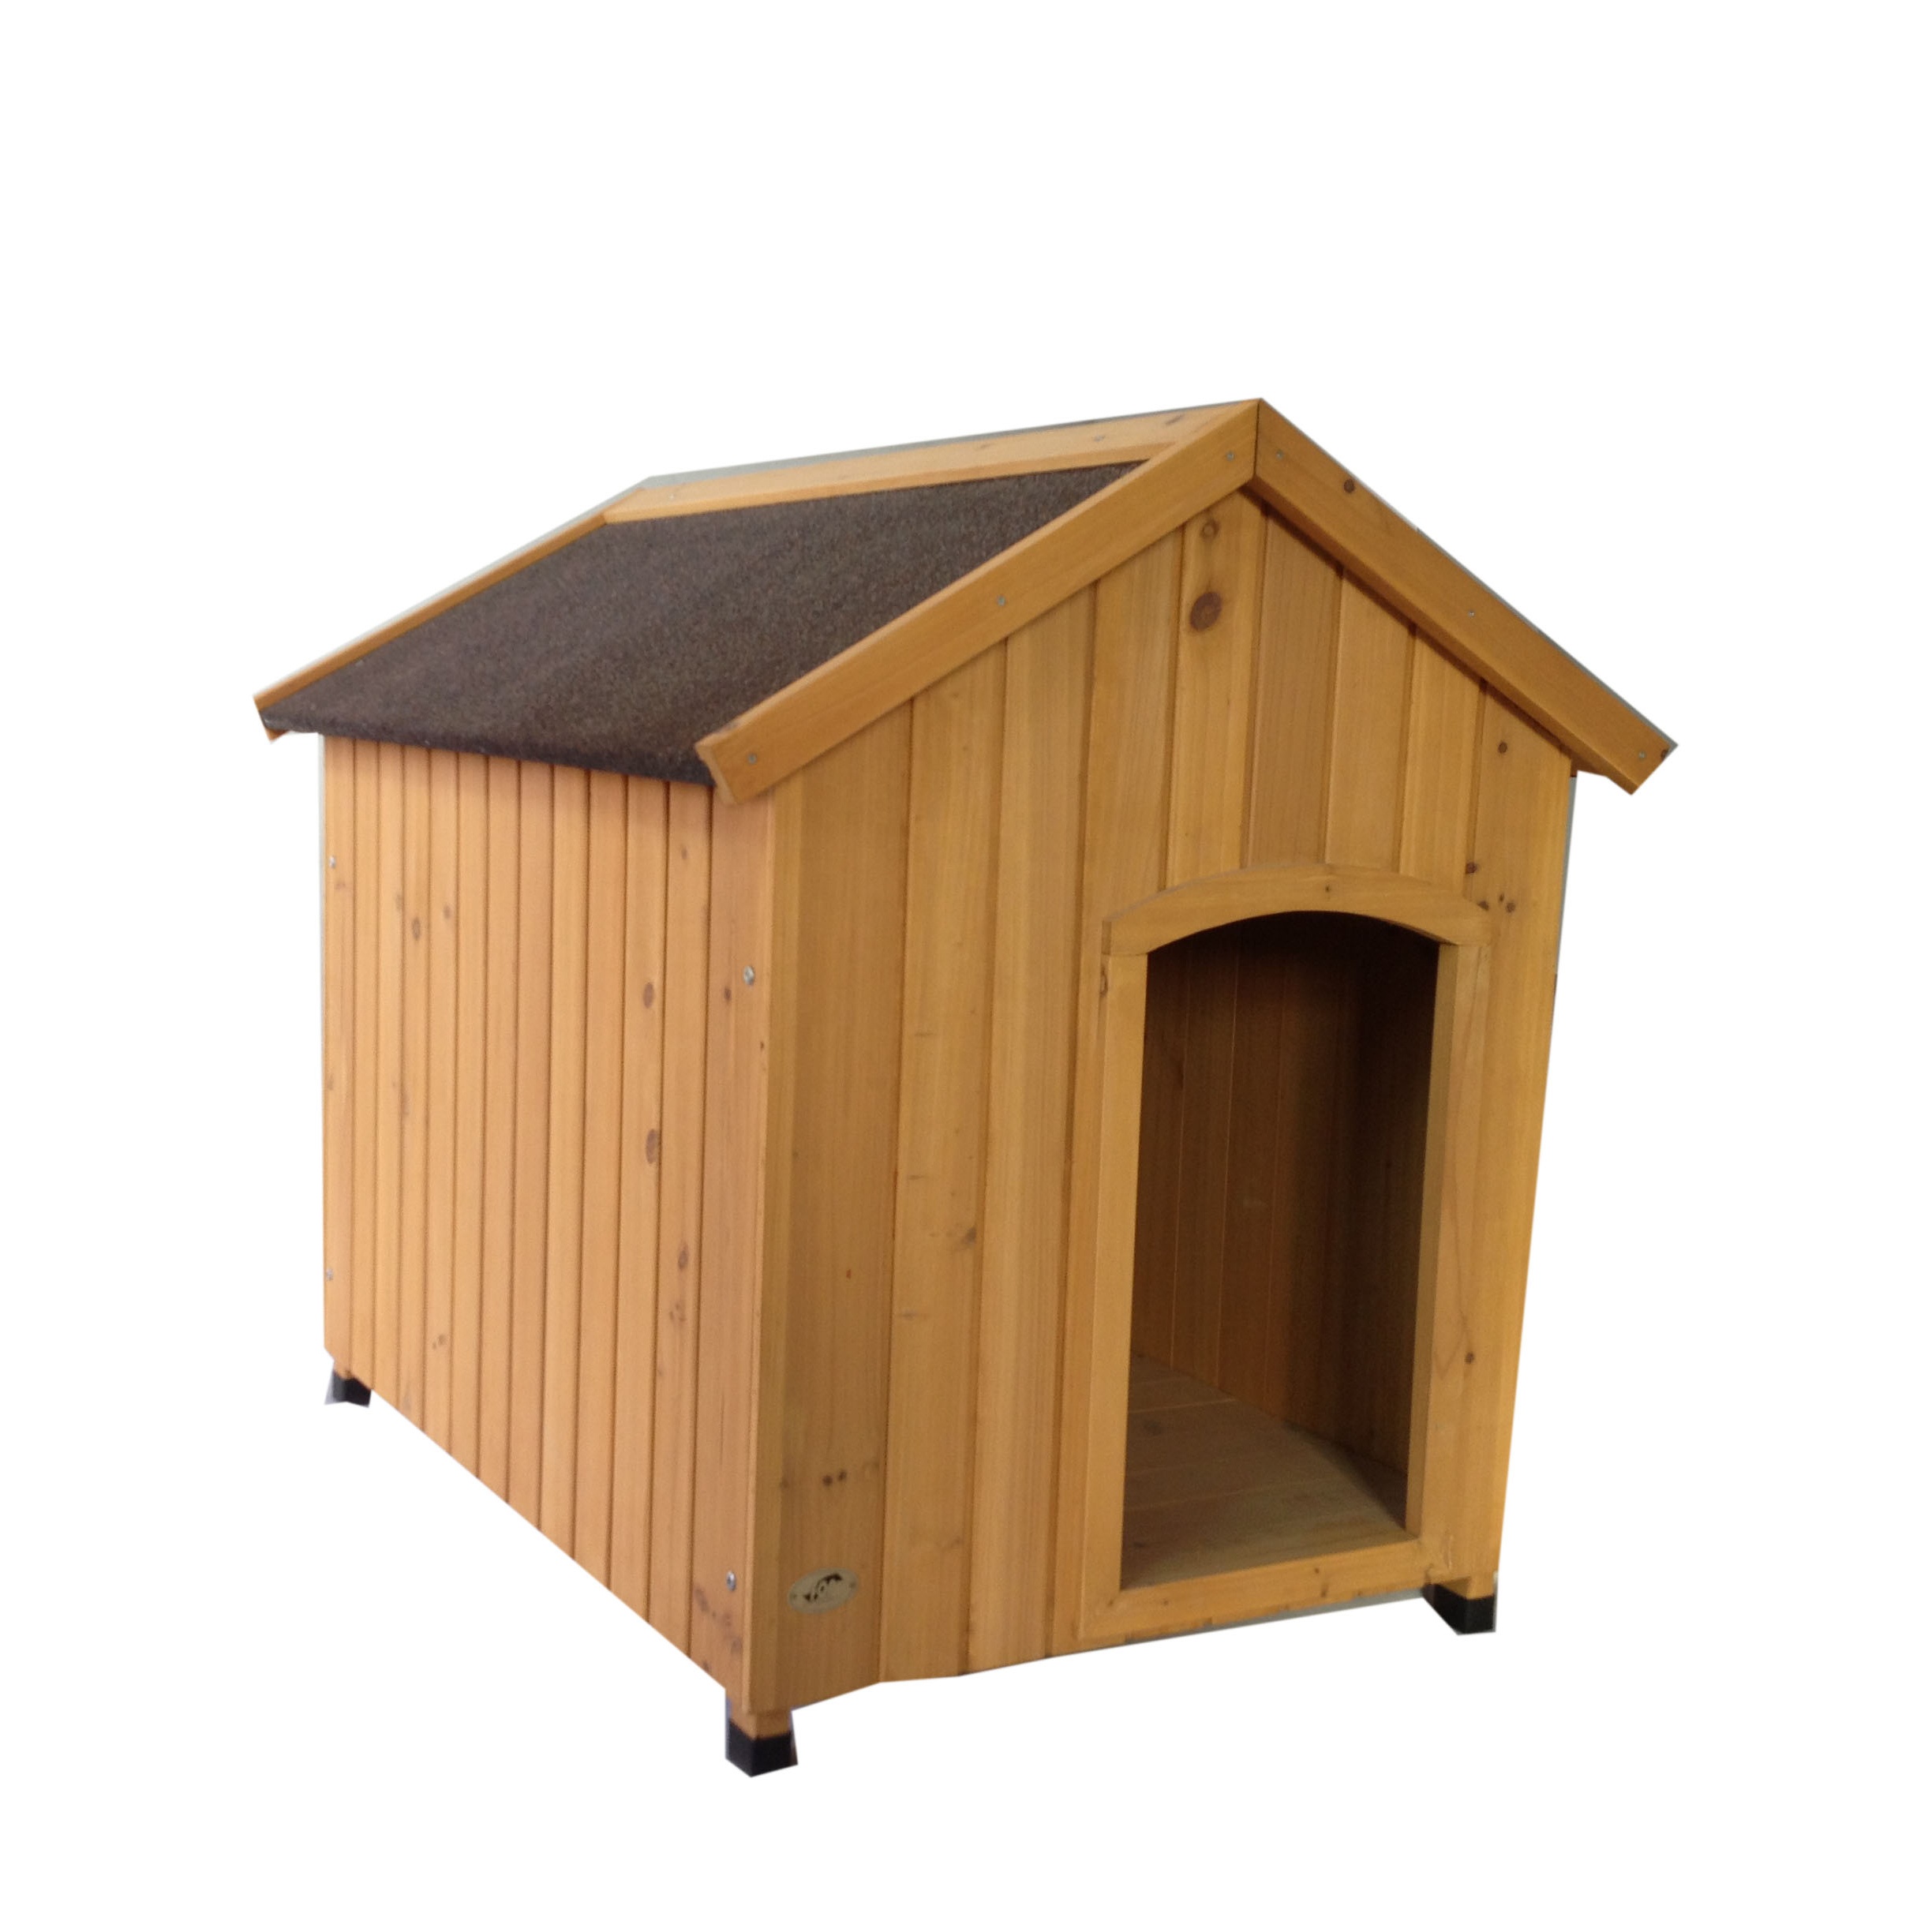 decorative new Design Wooden Outdoor dog house factory Kennel Cages Portable Pet Houses